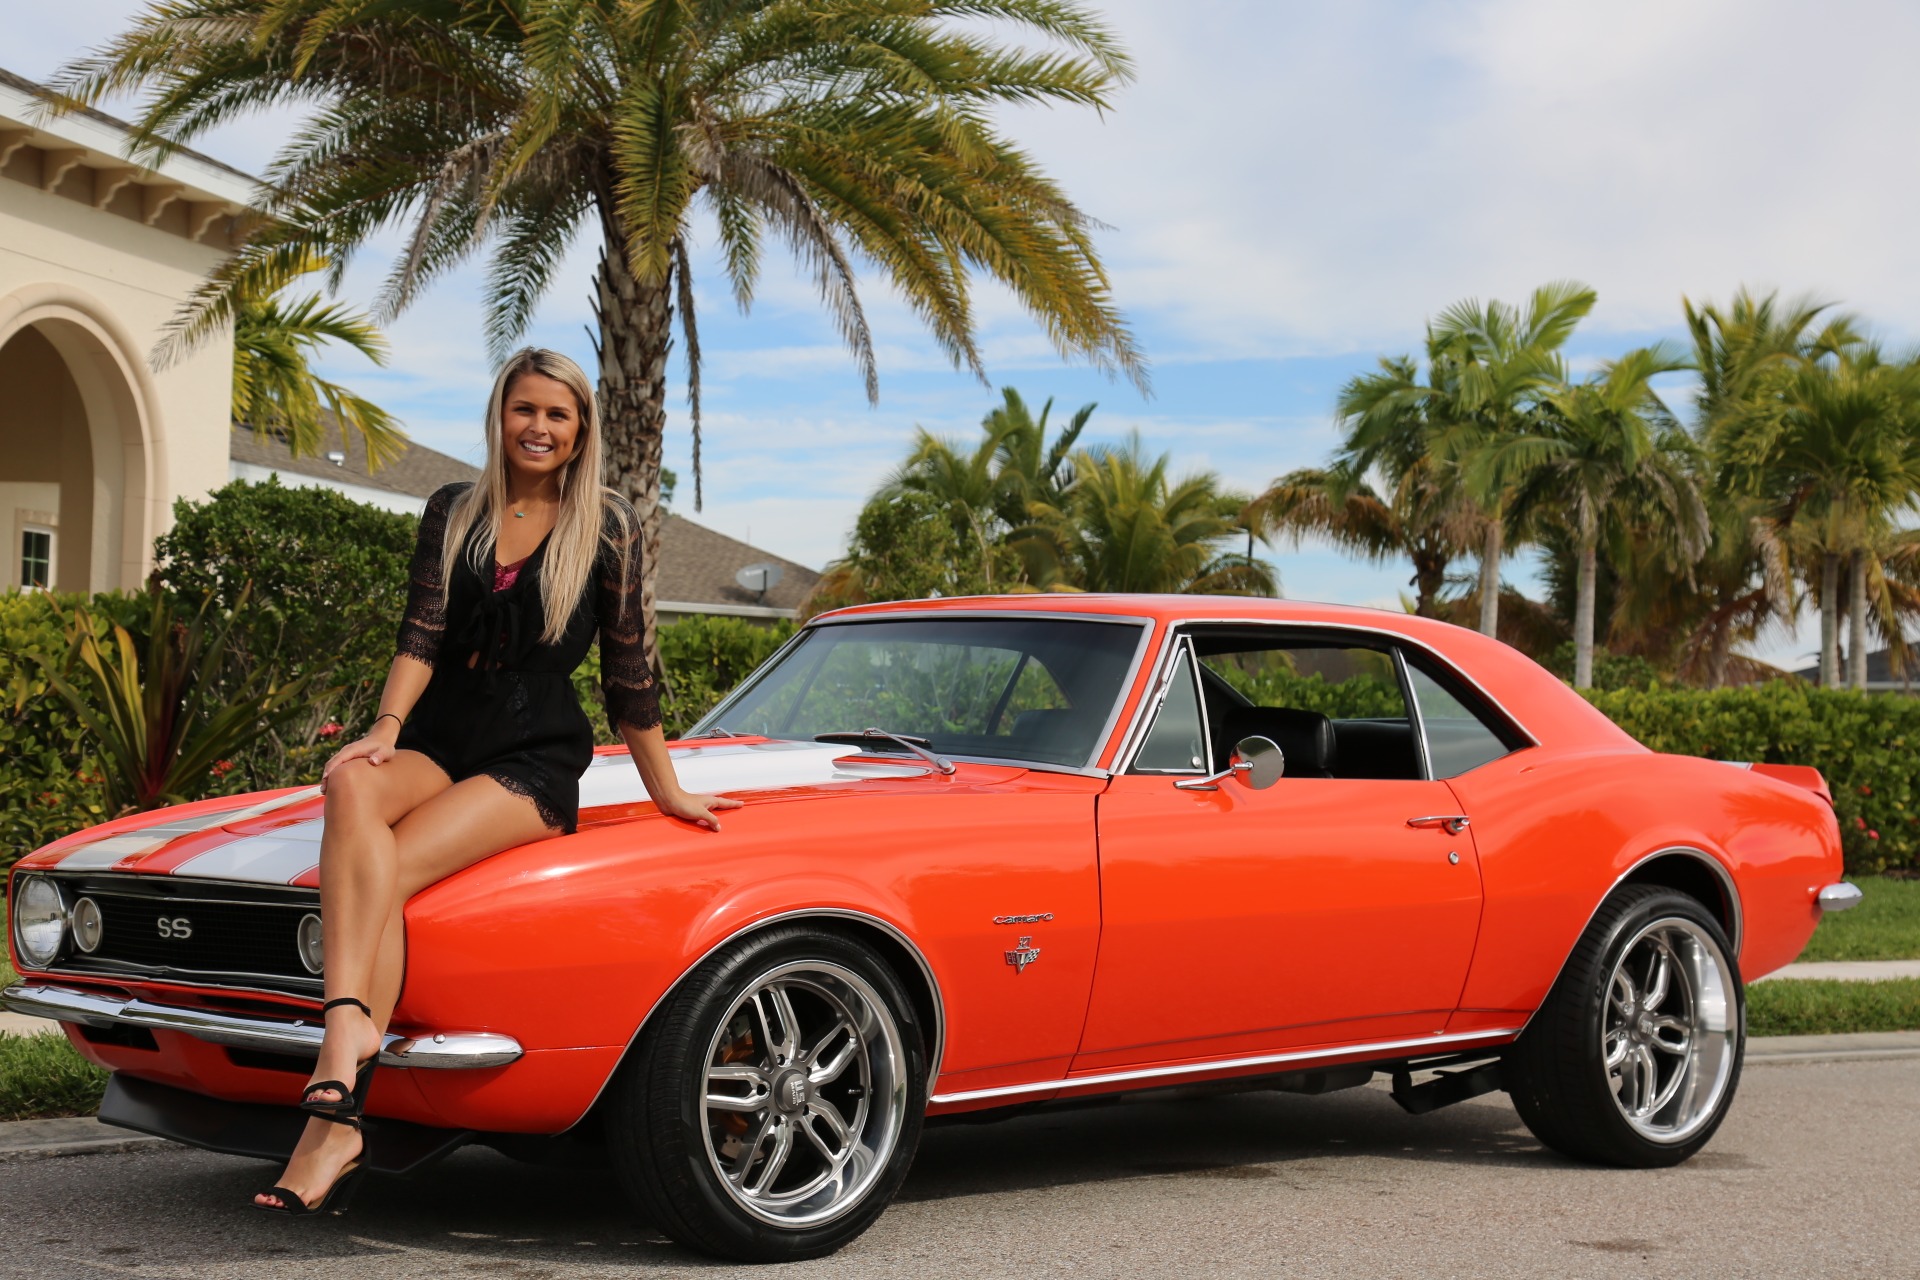 Used 1967 Chevy Camaro V8 Auto for sale Sold at Muscle Cars for Sale Inc. in Fort Myers FL 33912 1